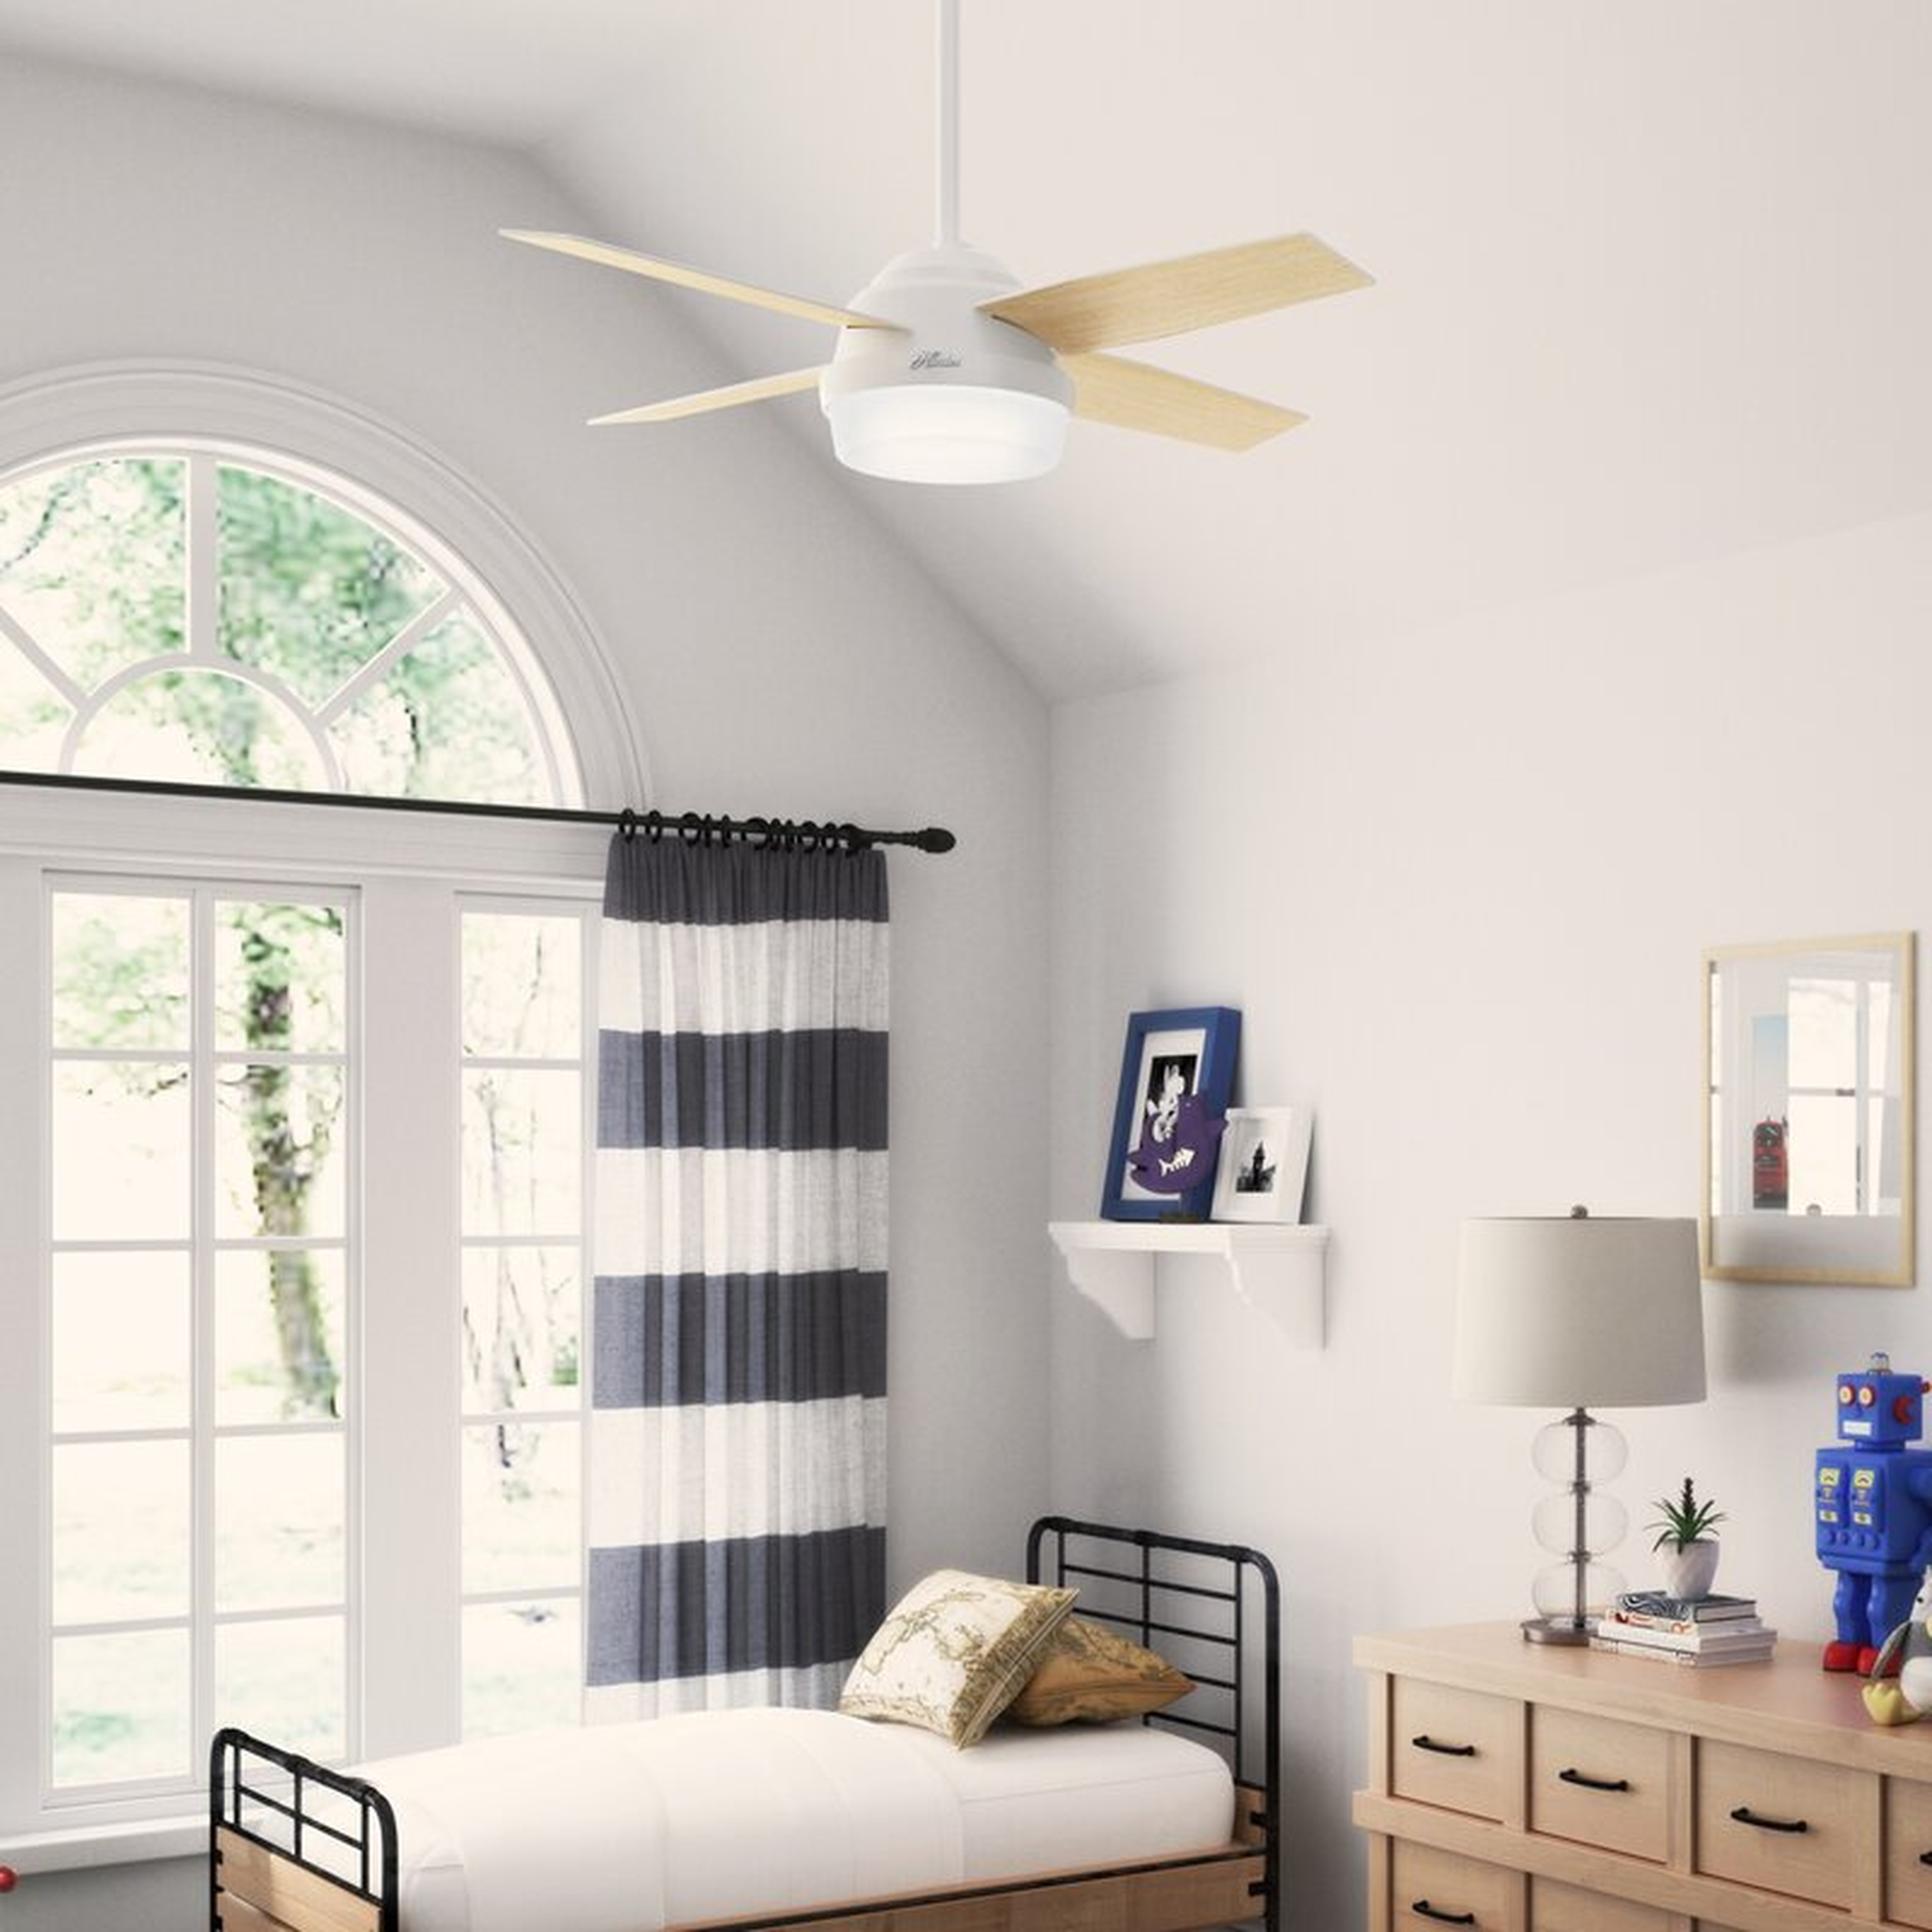 44" Dempsey 4 - Blade LED Standard Ceiling Fan with Remote Control and Light Kit Included - Wayfair